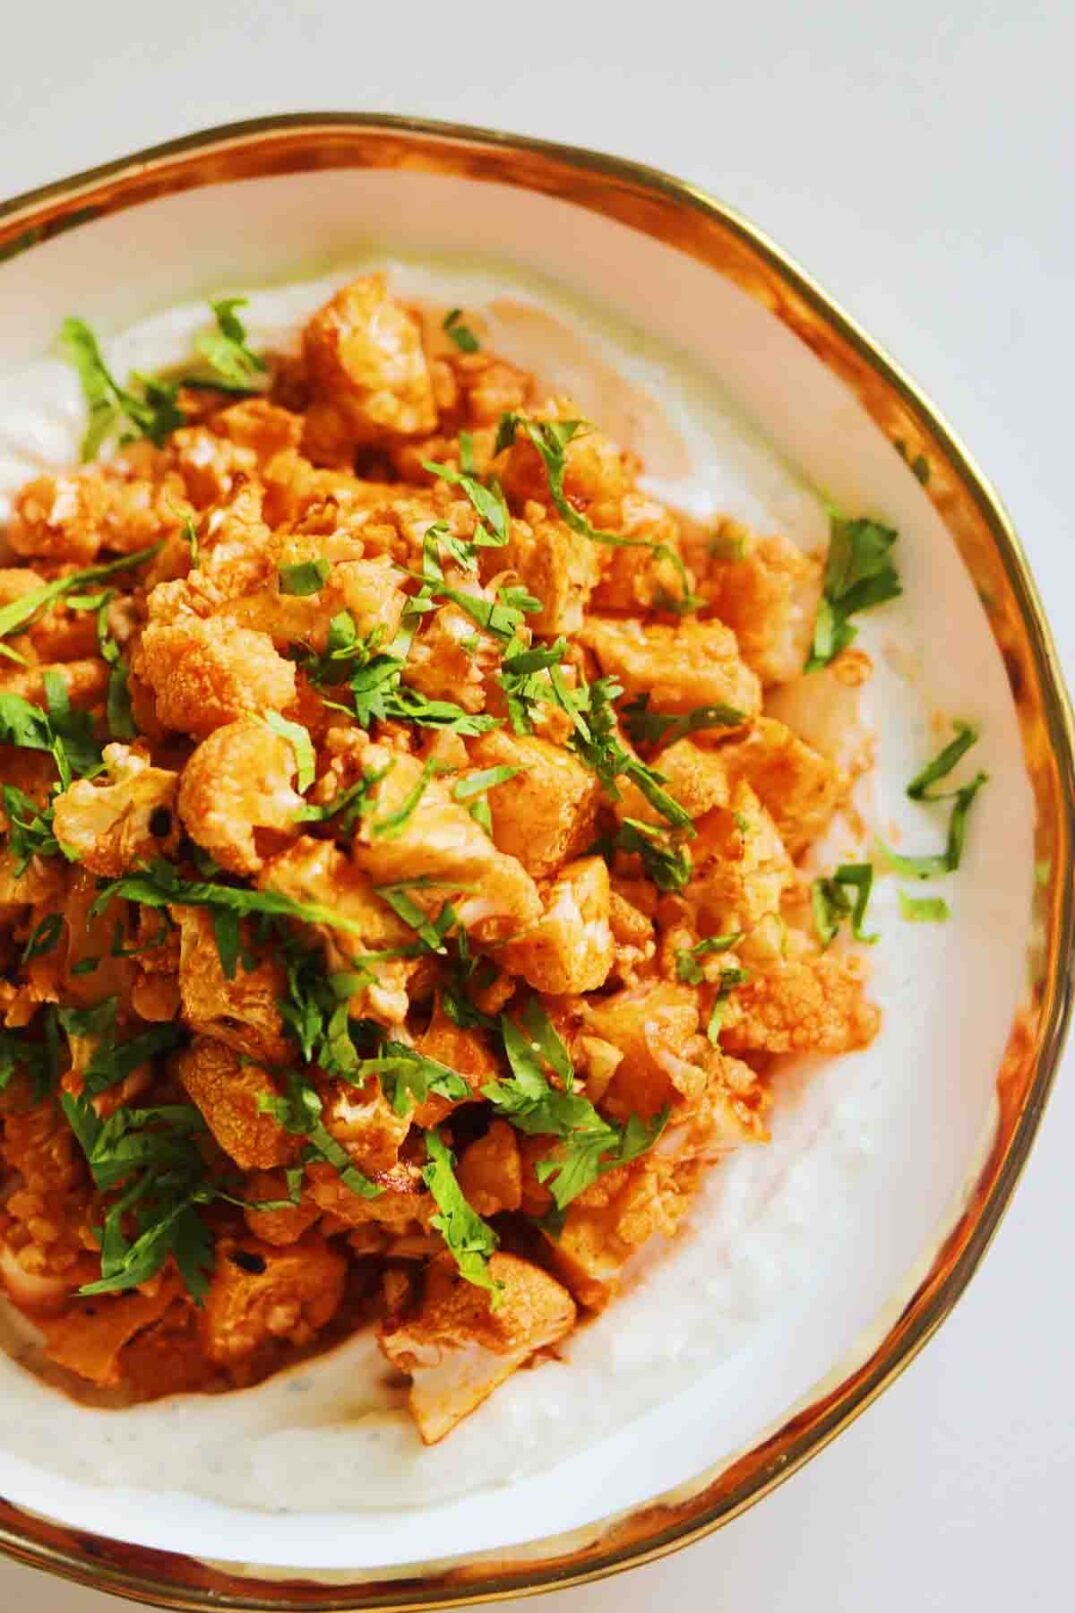 cilantro sprinkled on top of buffalo cauliflower in a bowl